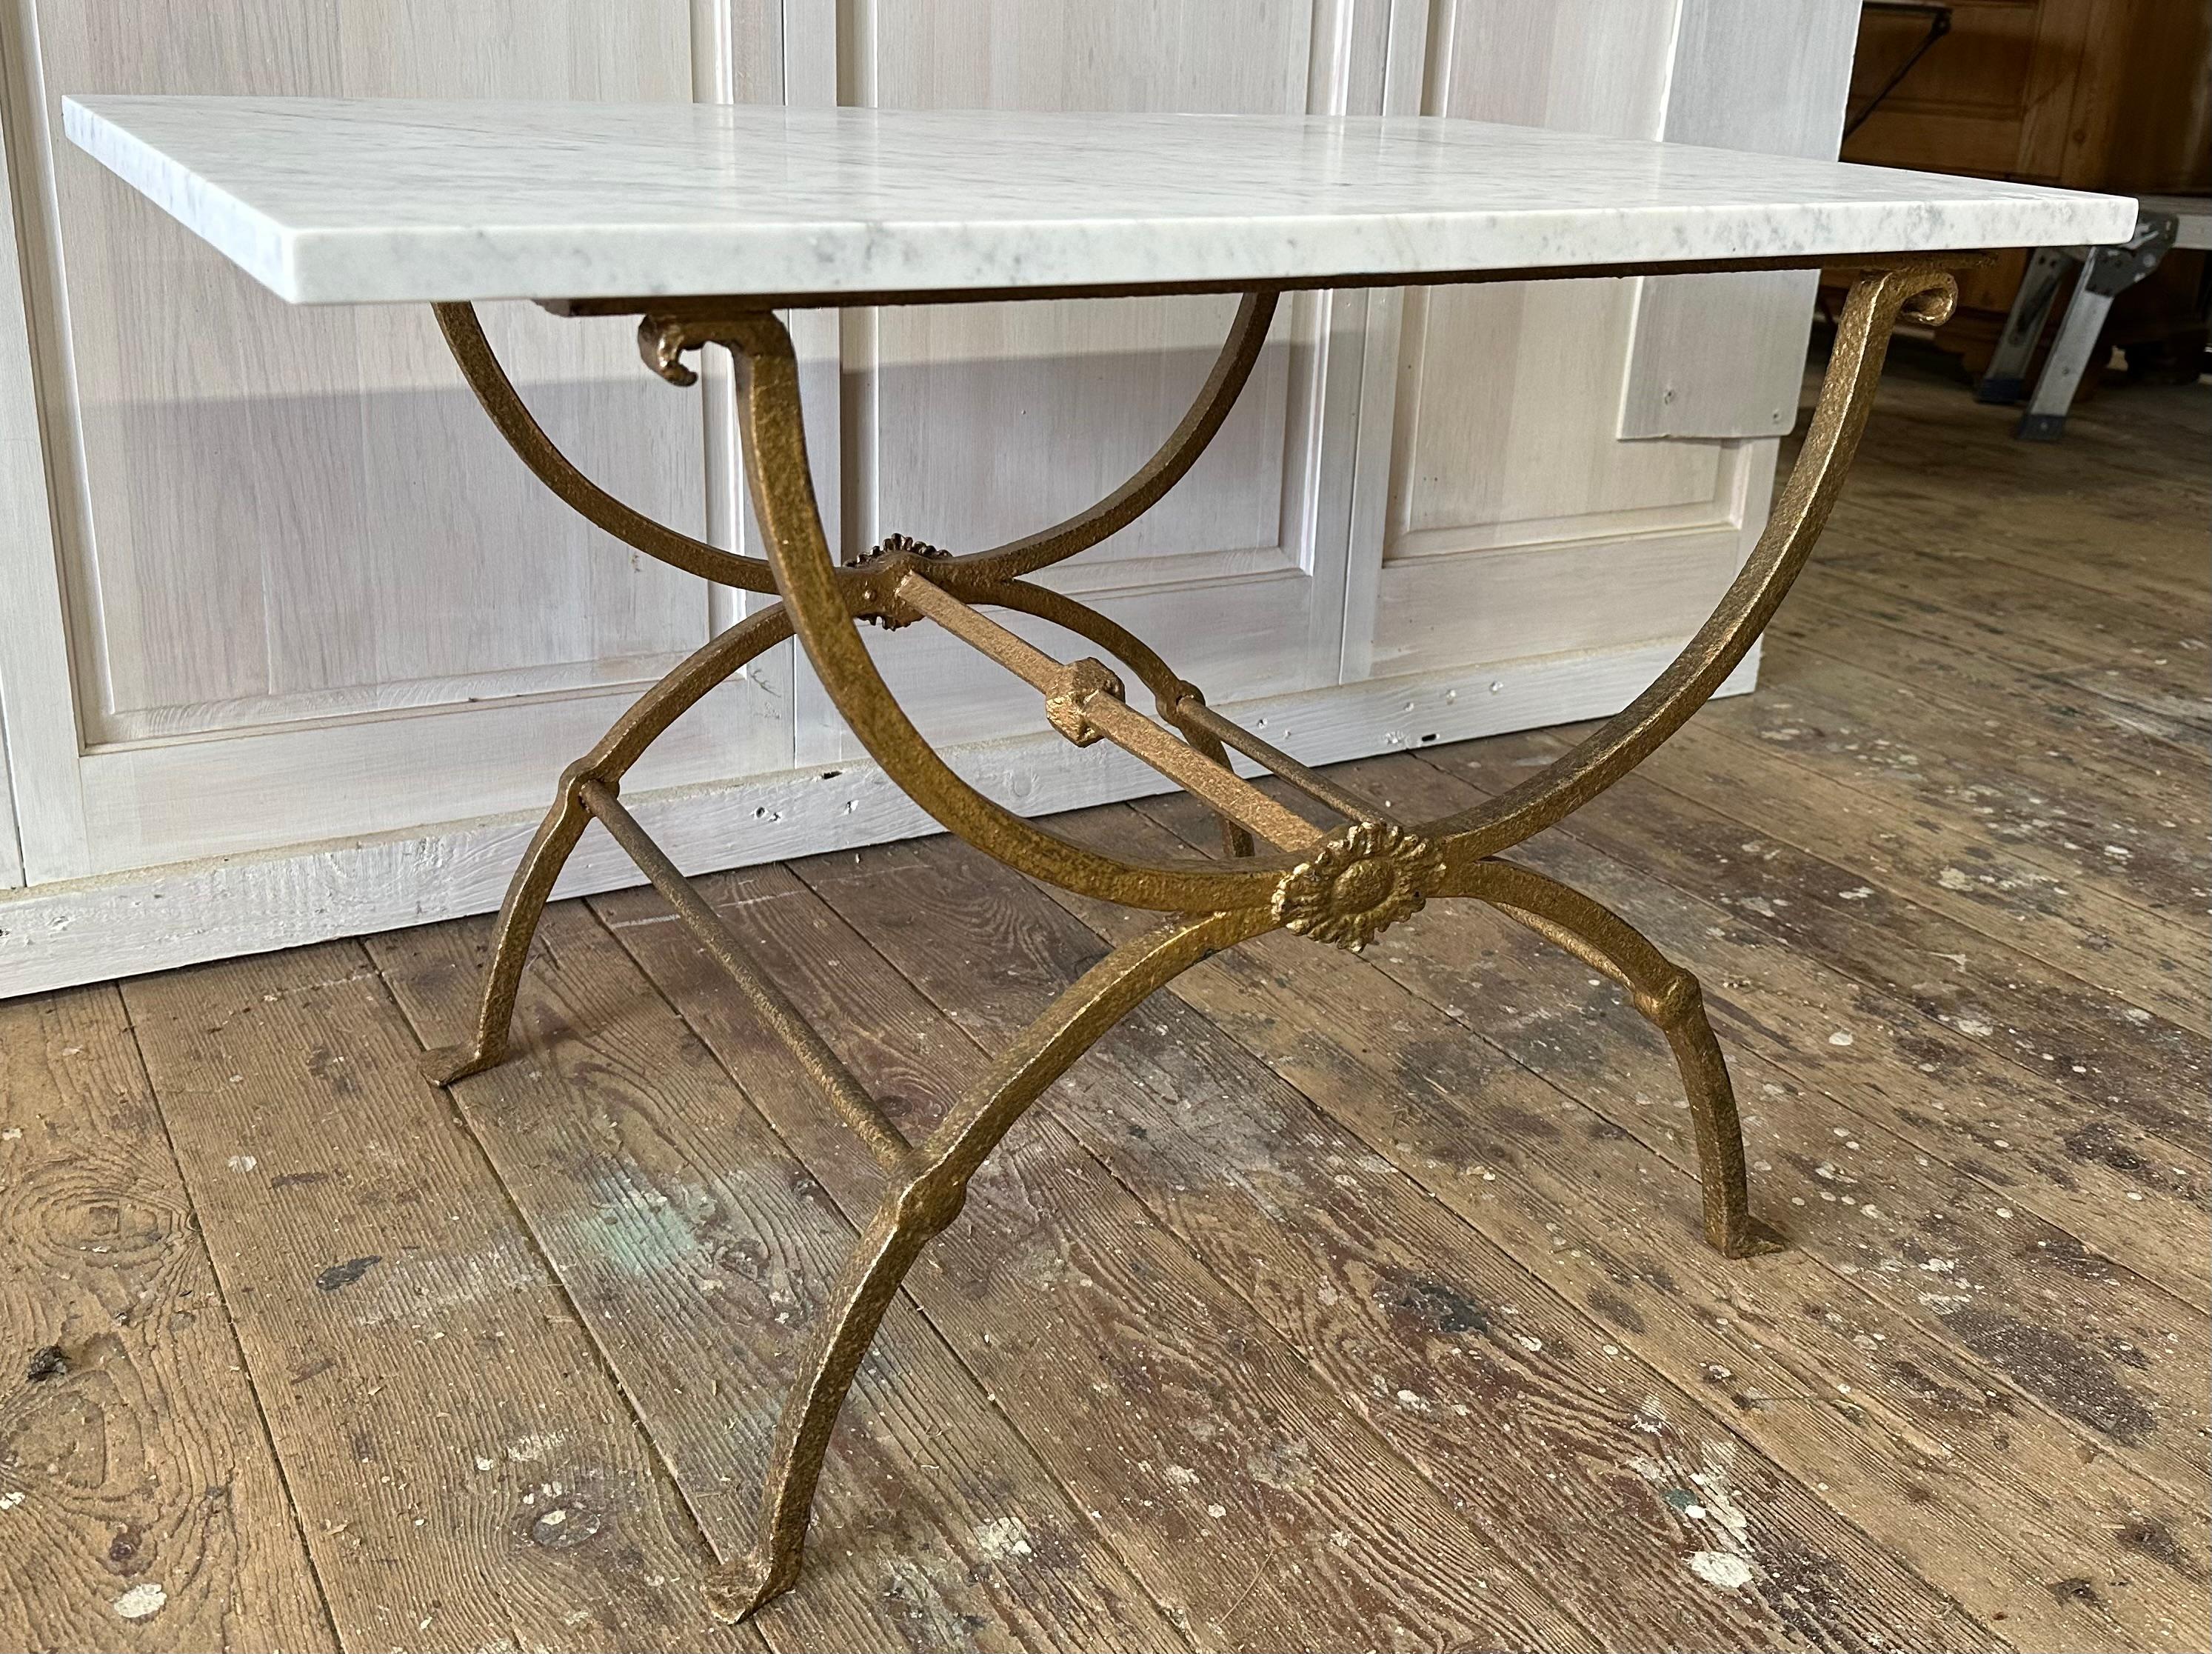 Add style and presence to any room with this beautifully aged patinated Italian coffee table featuring a rectangular white carrara marble top supported by sculptural base having curule legs crafted from iron. The table is stable and solid with